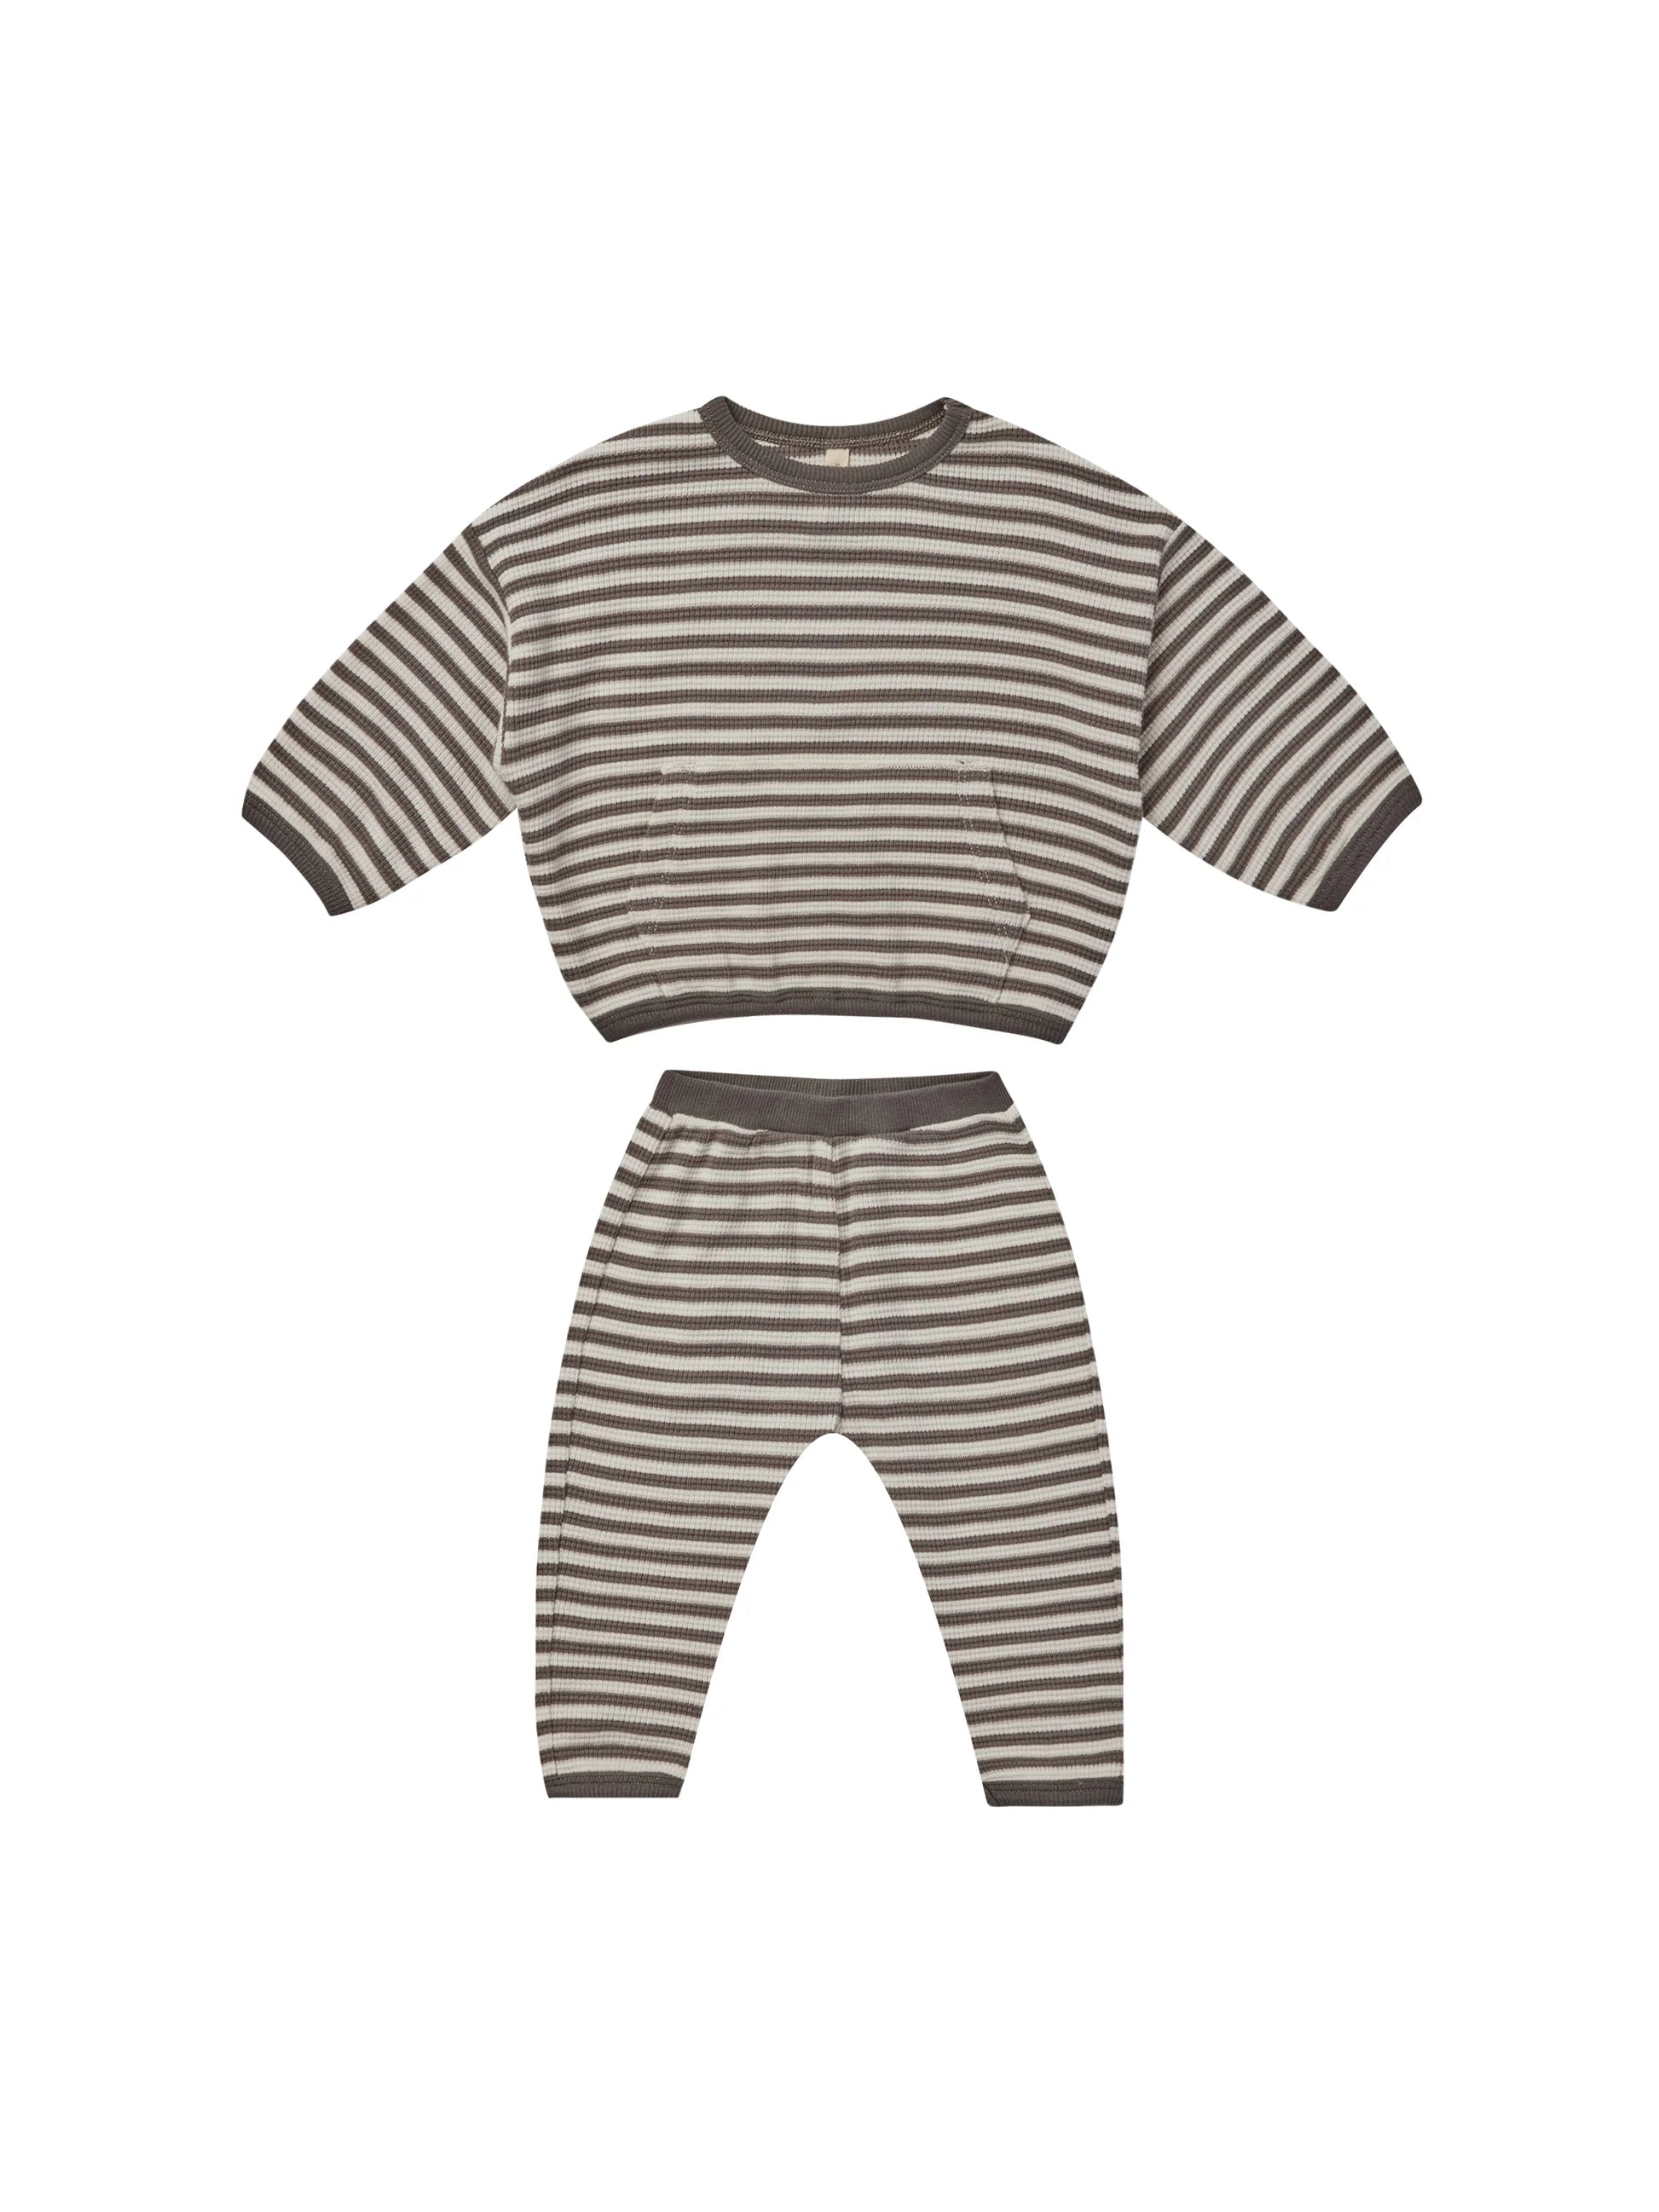 Quincy Mae Charcoal Stripe Waffle Top and Pants Set